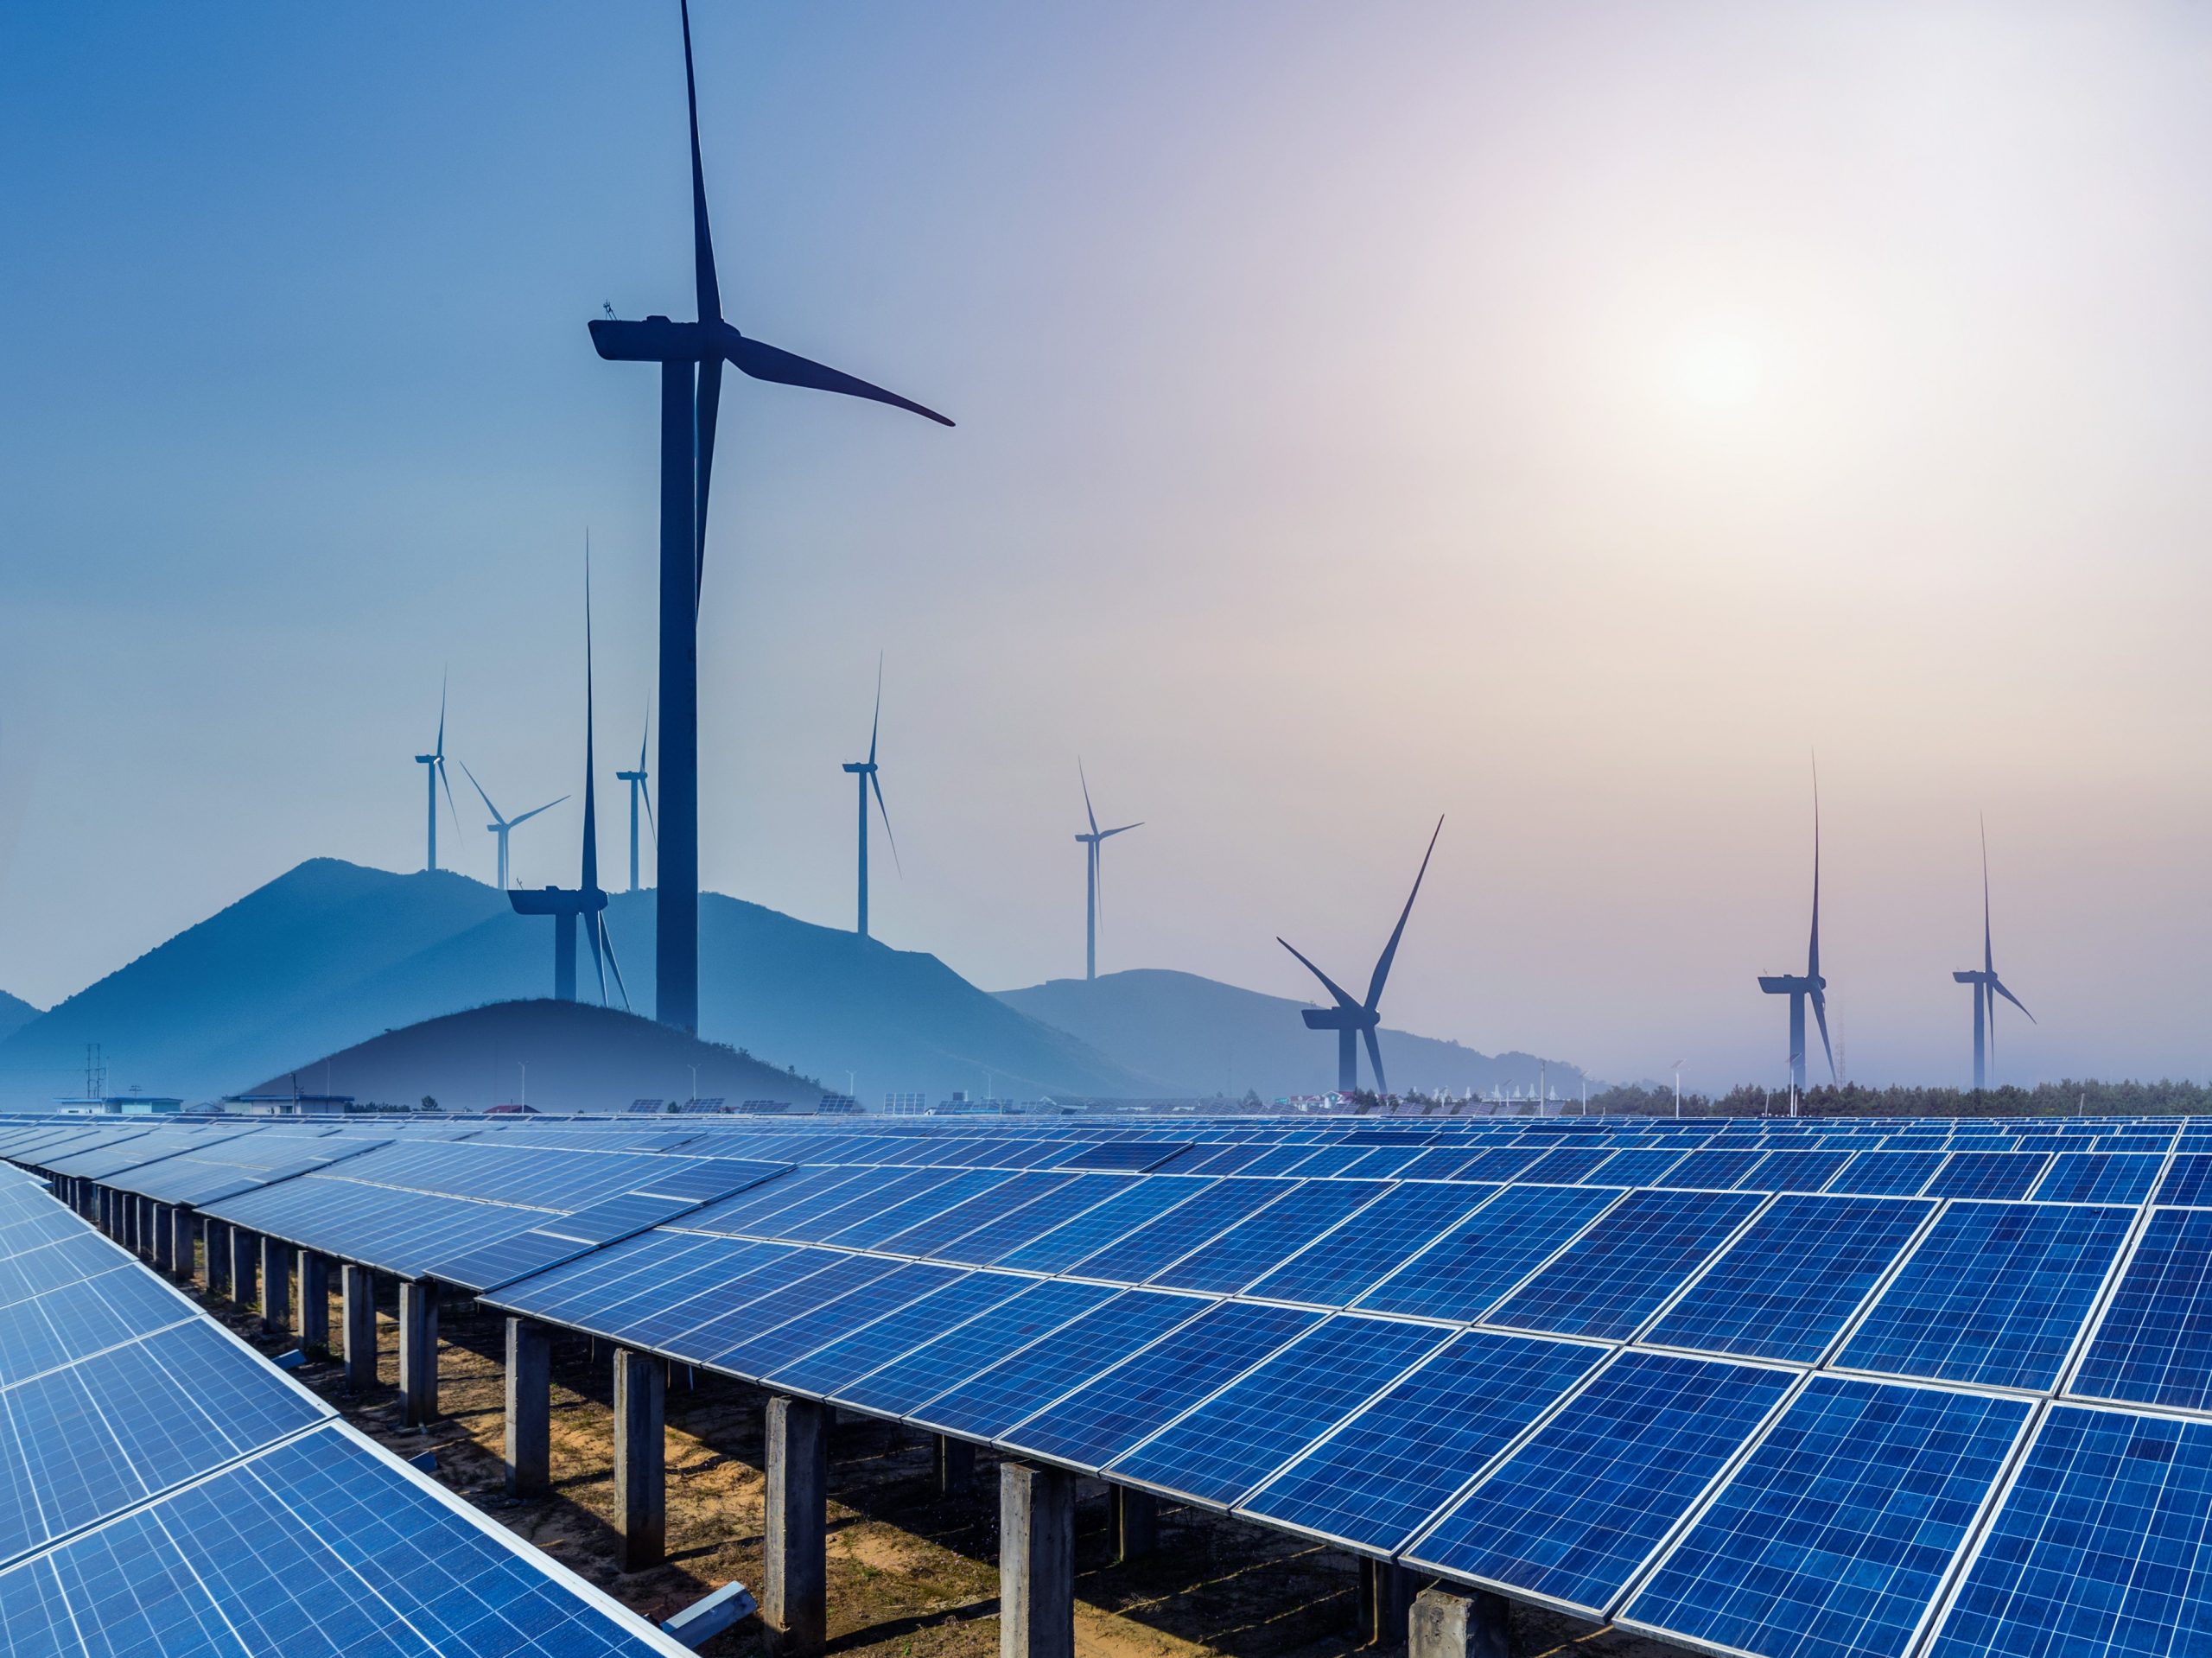 UNSW renewables experts Alistair Sproul and Renate Egan weigh in on the future of energy generation, from solar voltaics to wind farms to battery storage.